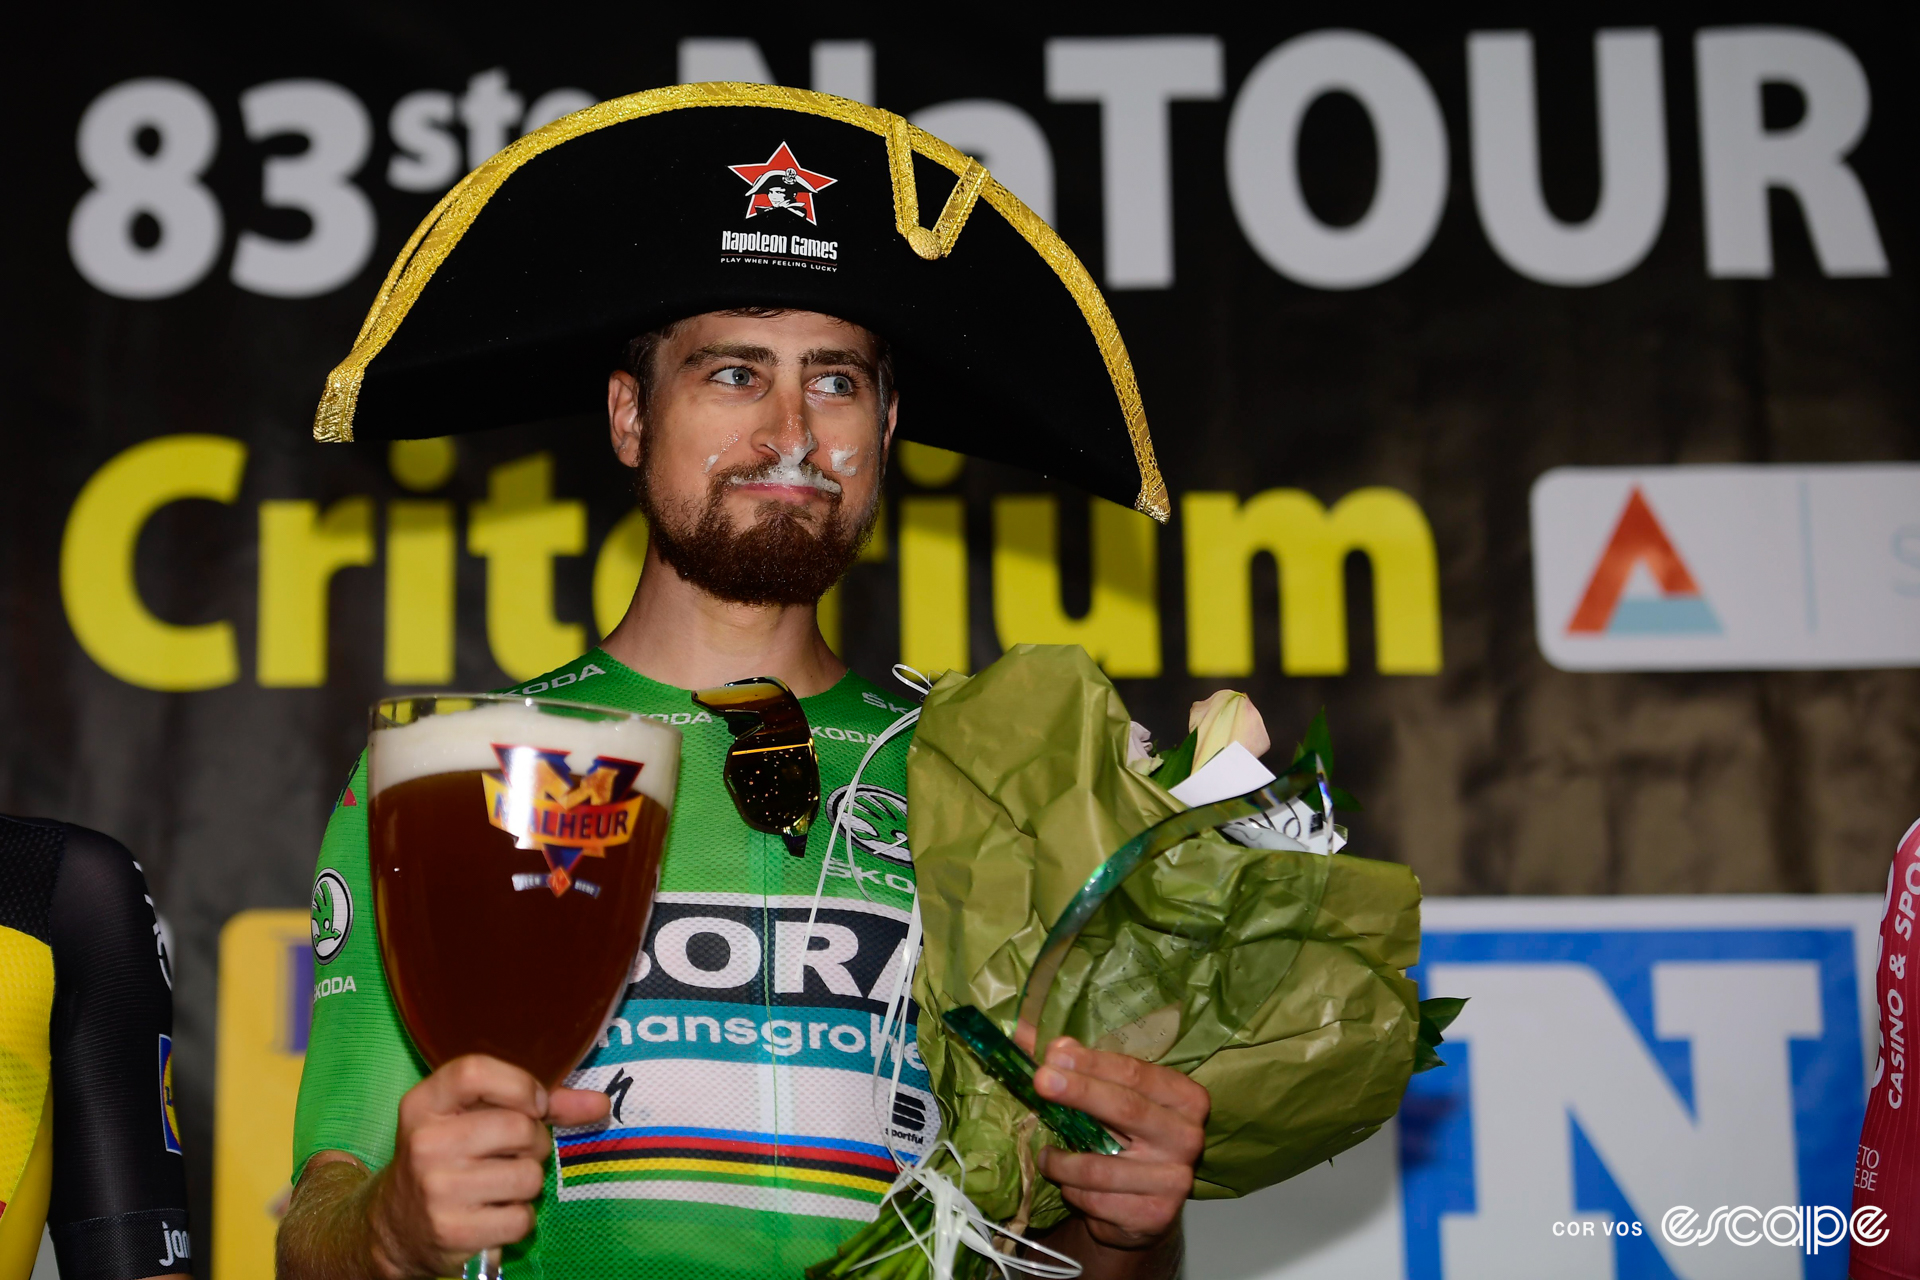 Peter Sagan stands on a podium with a Napoleon-esque hat on his head, beer froth on his face, and with a cheeky close-mouthed grin. He's holding a giant beer and a bouquet of flowers.